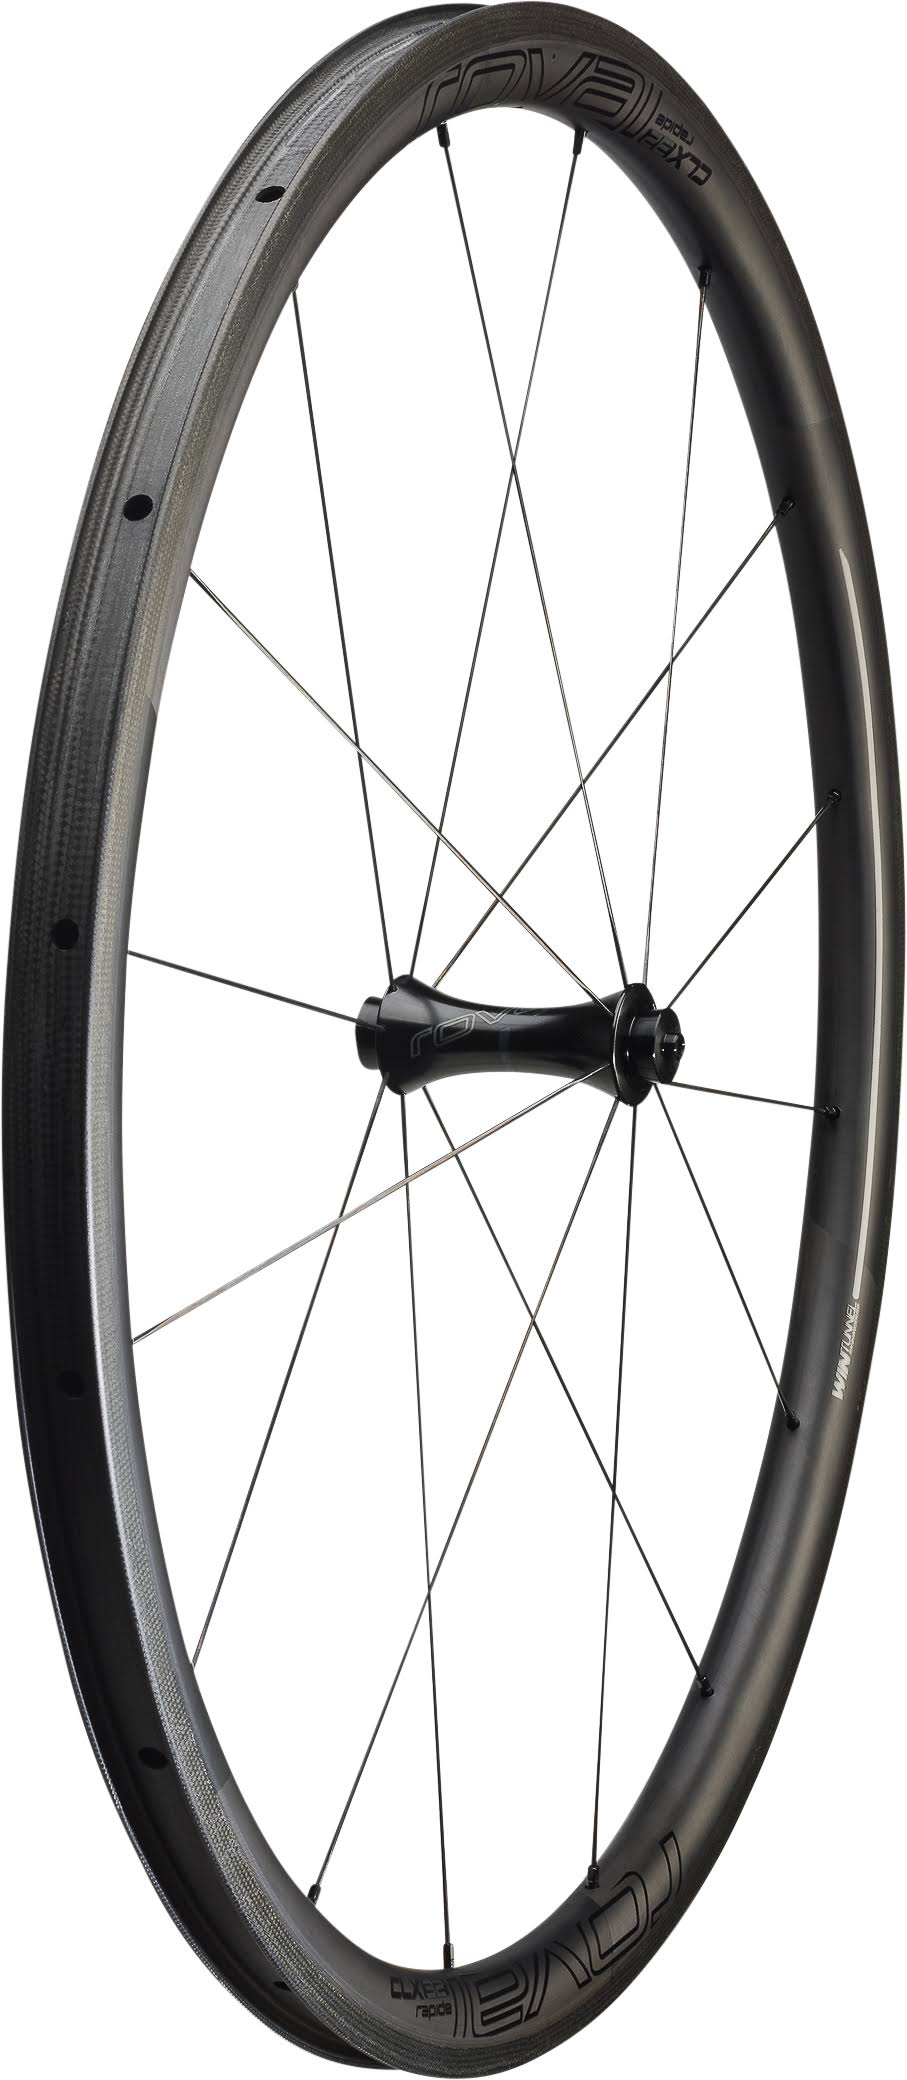 Specialized Roval Front Wheel - Satin Carbon and Gloss black